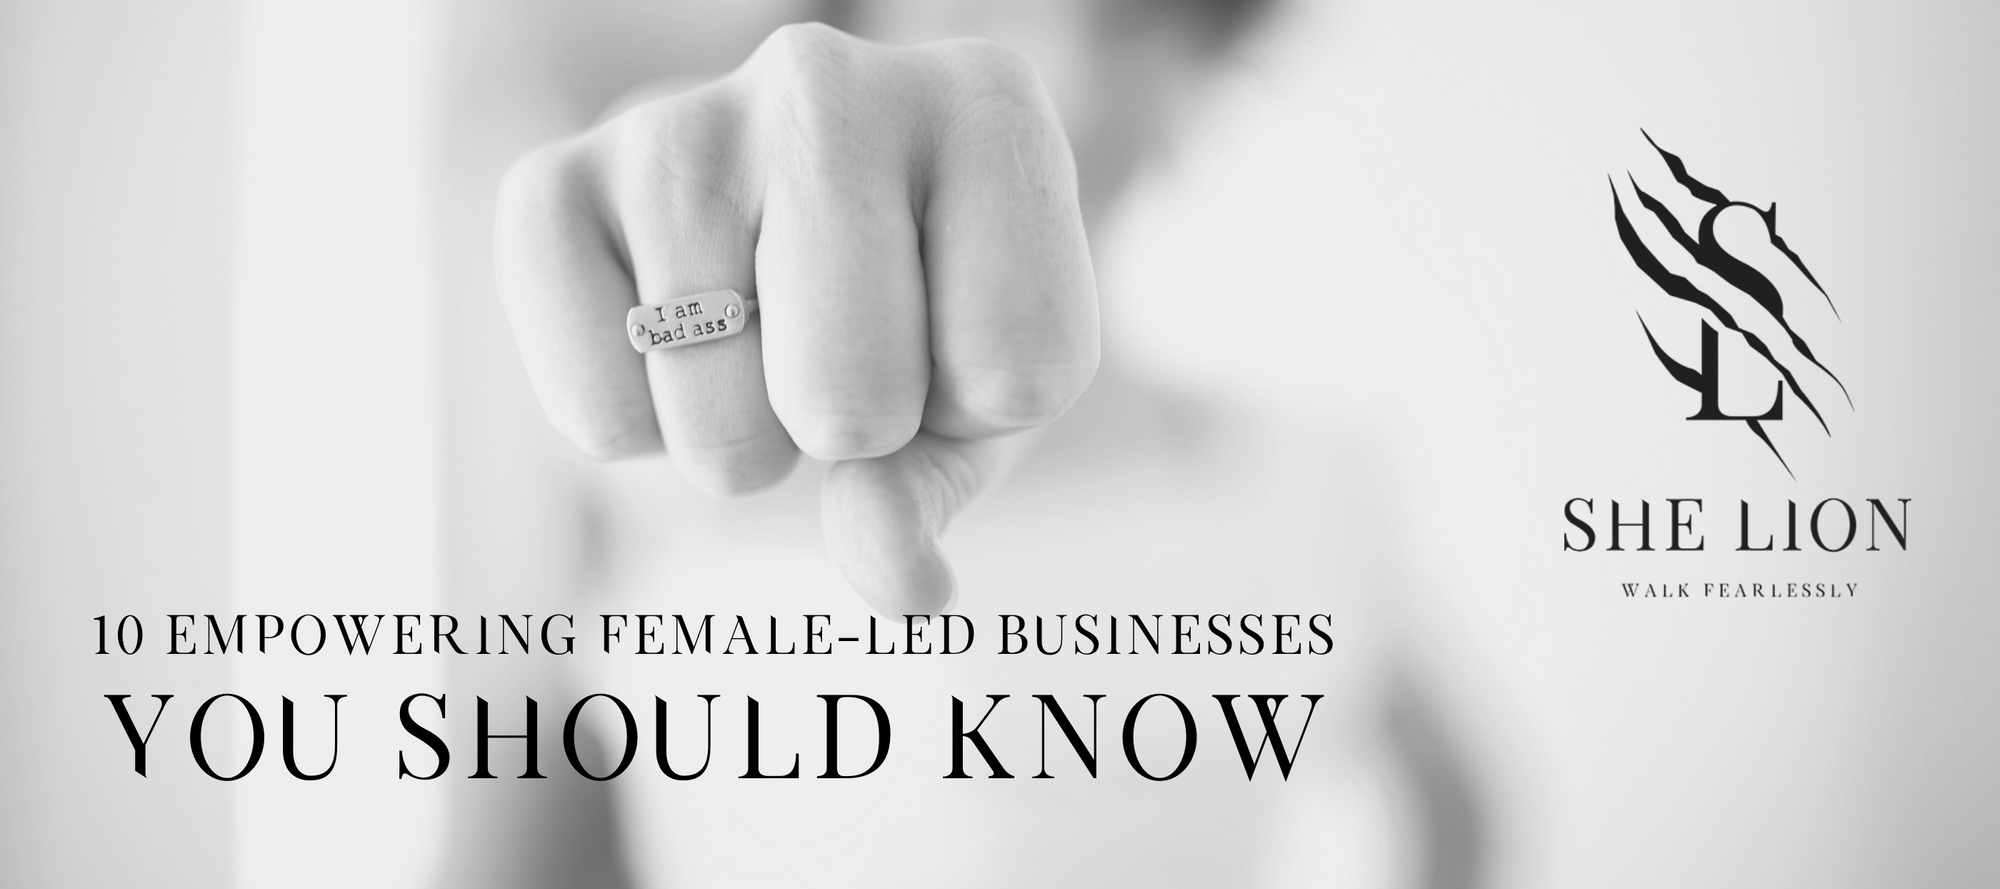 10 Empowering Female-Led Businesses You Should Know